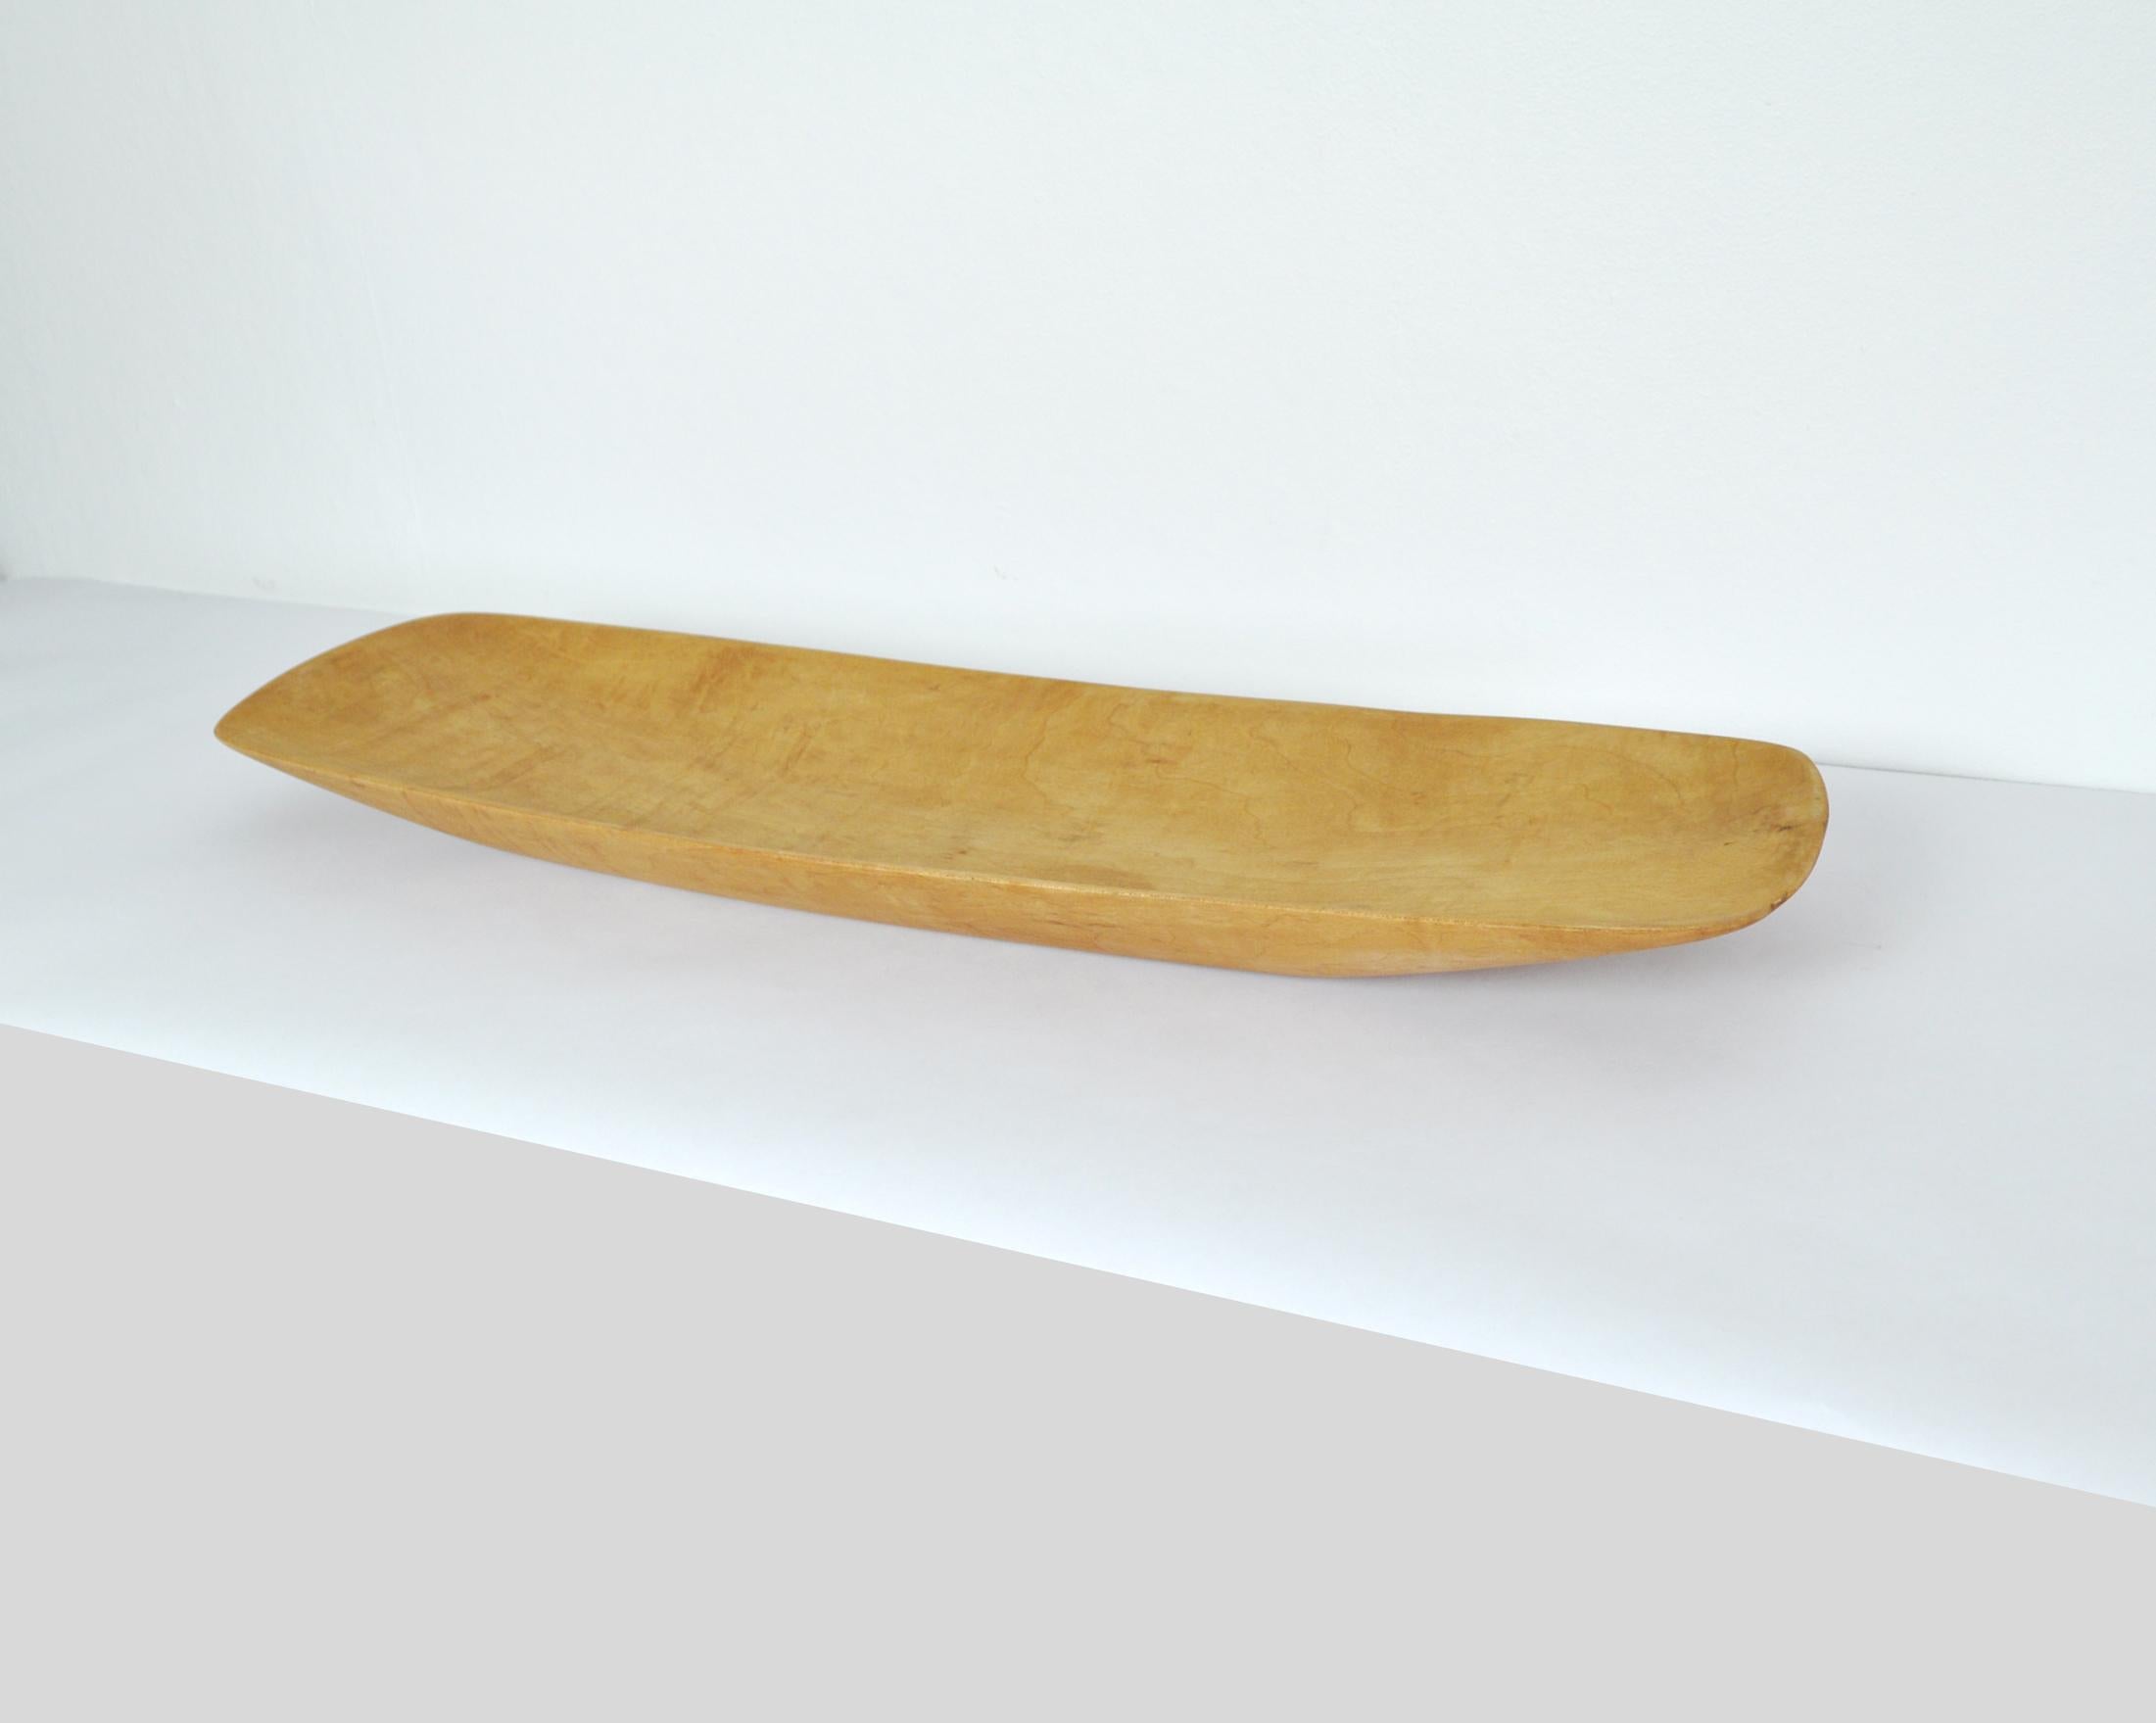 Handcrafted Danish Birch Dish with an Organic Design, 1960s For Sale 2